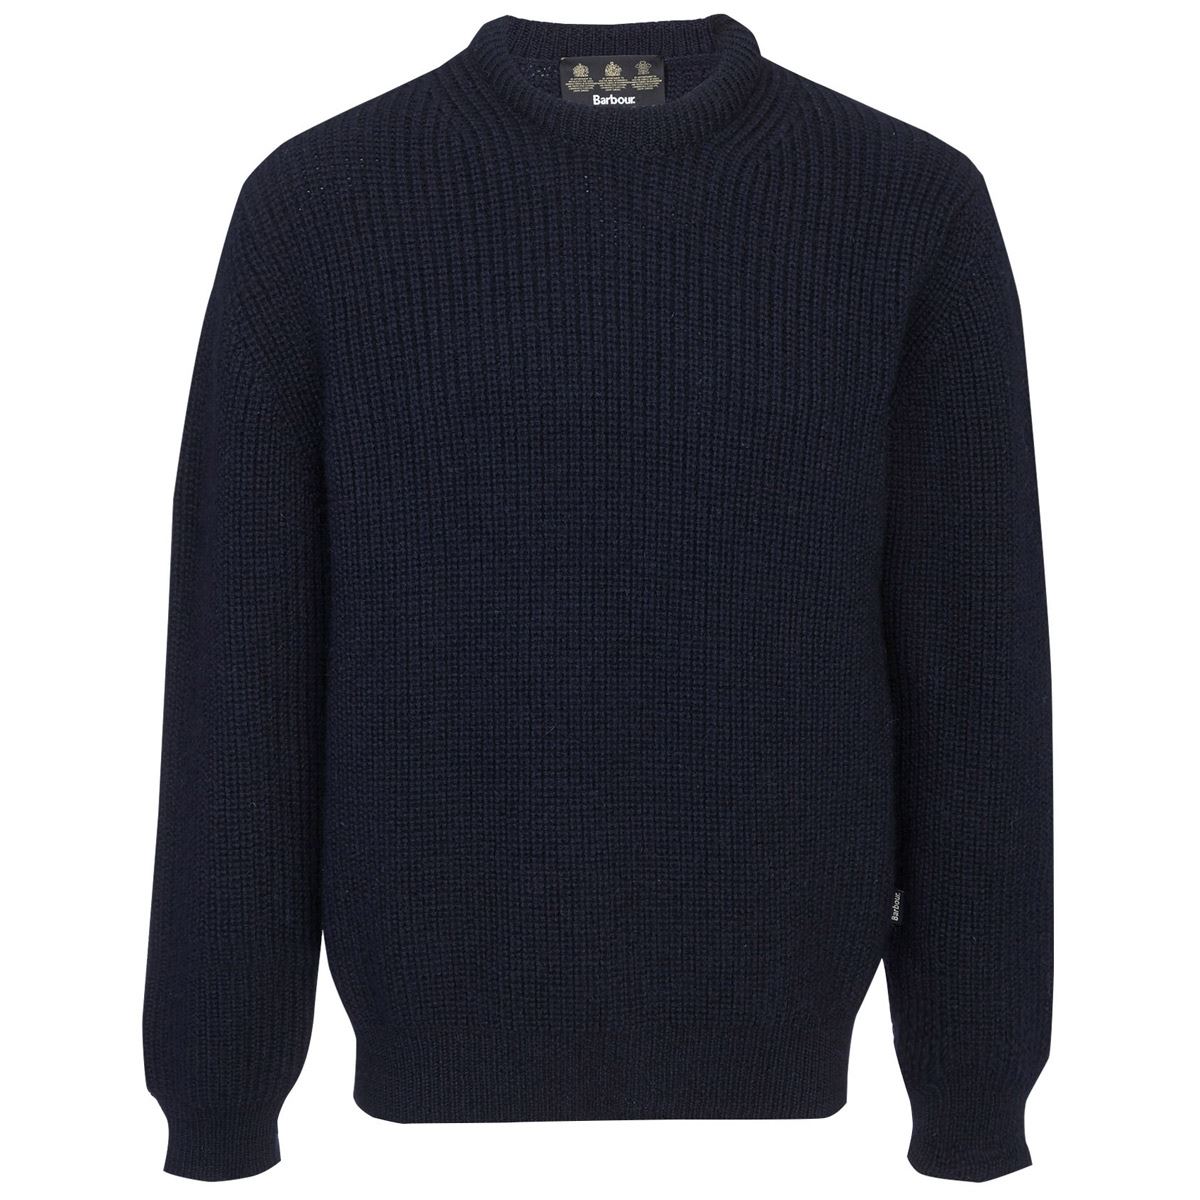 Barbour New Tyne Crew Neck Sweater Questions & Answers